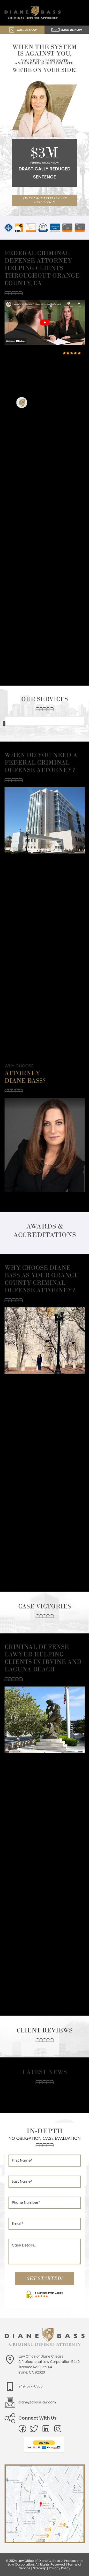 The Law Office of Diane C. Bass -  Irvine CA Lawyers